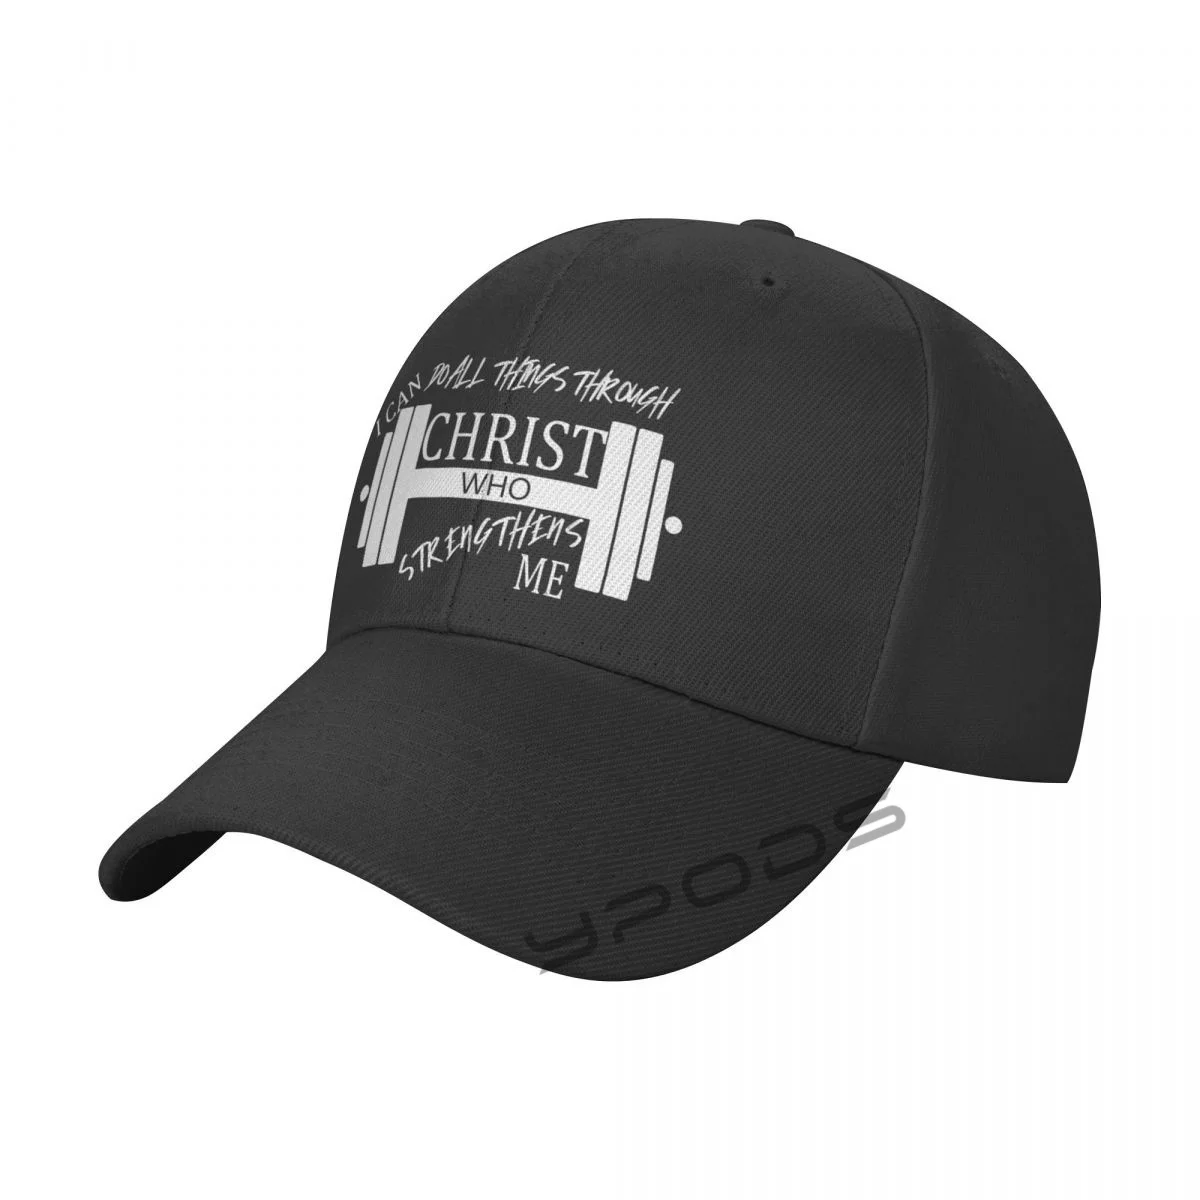 

I Can Do All Things Through Christ Who Strengthens Me New Baseball Caps for Men Cap Women Hat Snapback Casual Cap Casquette hats